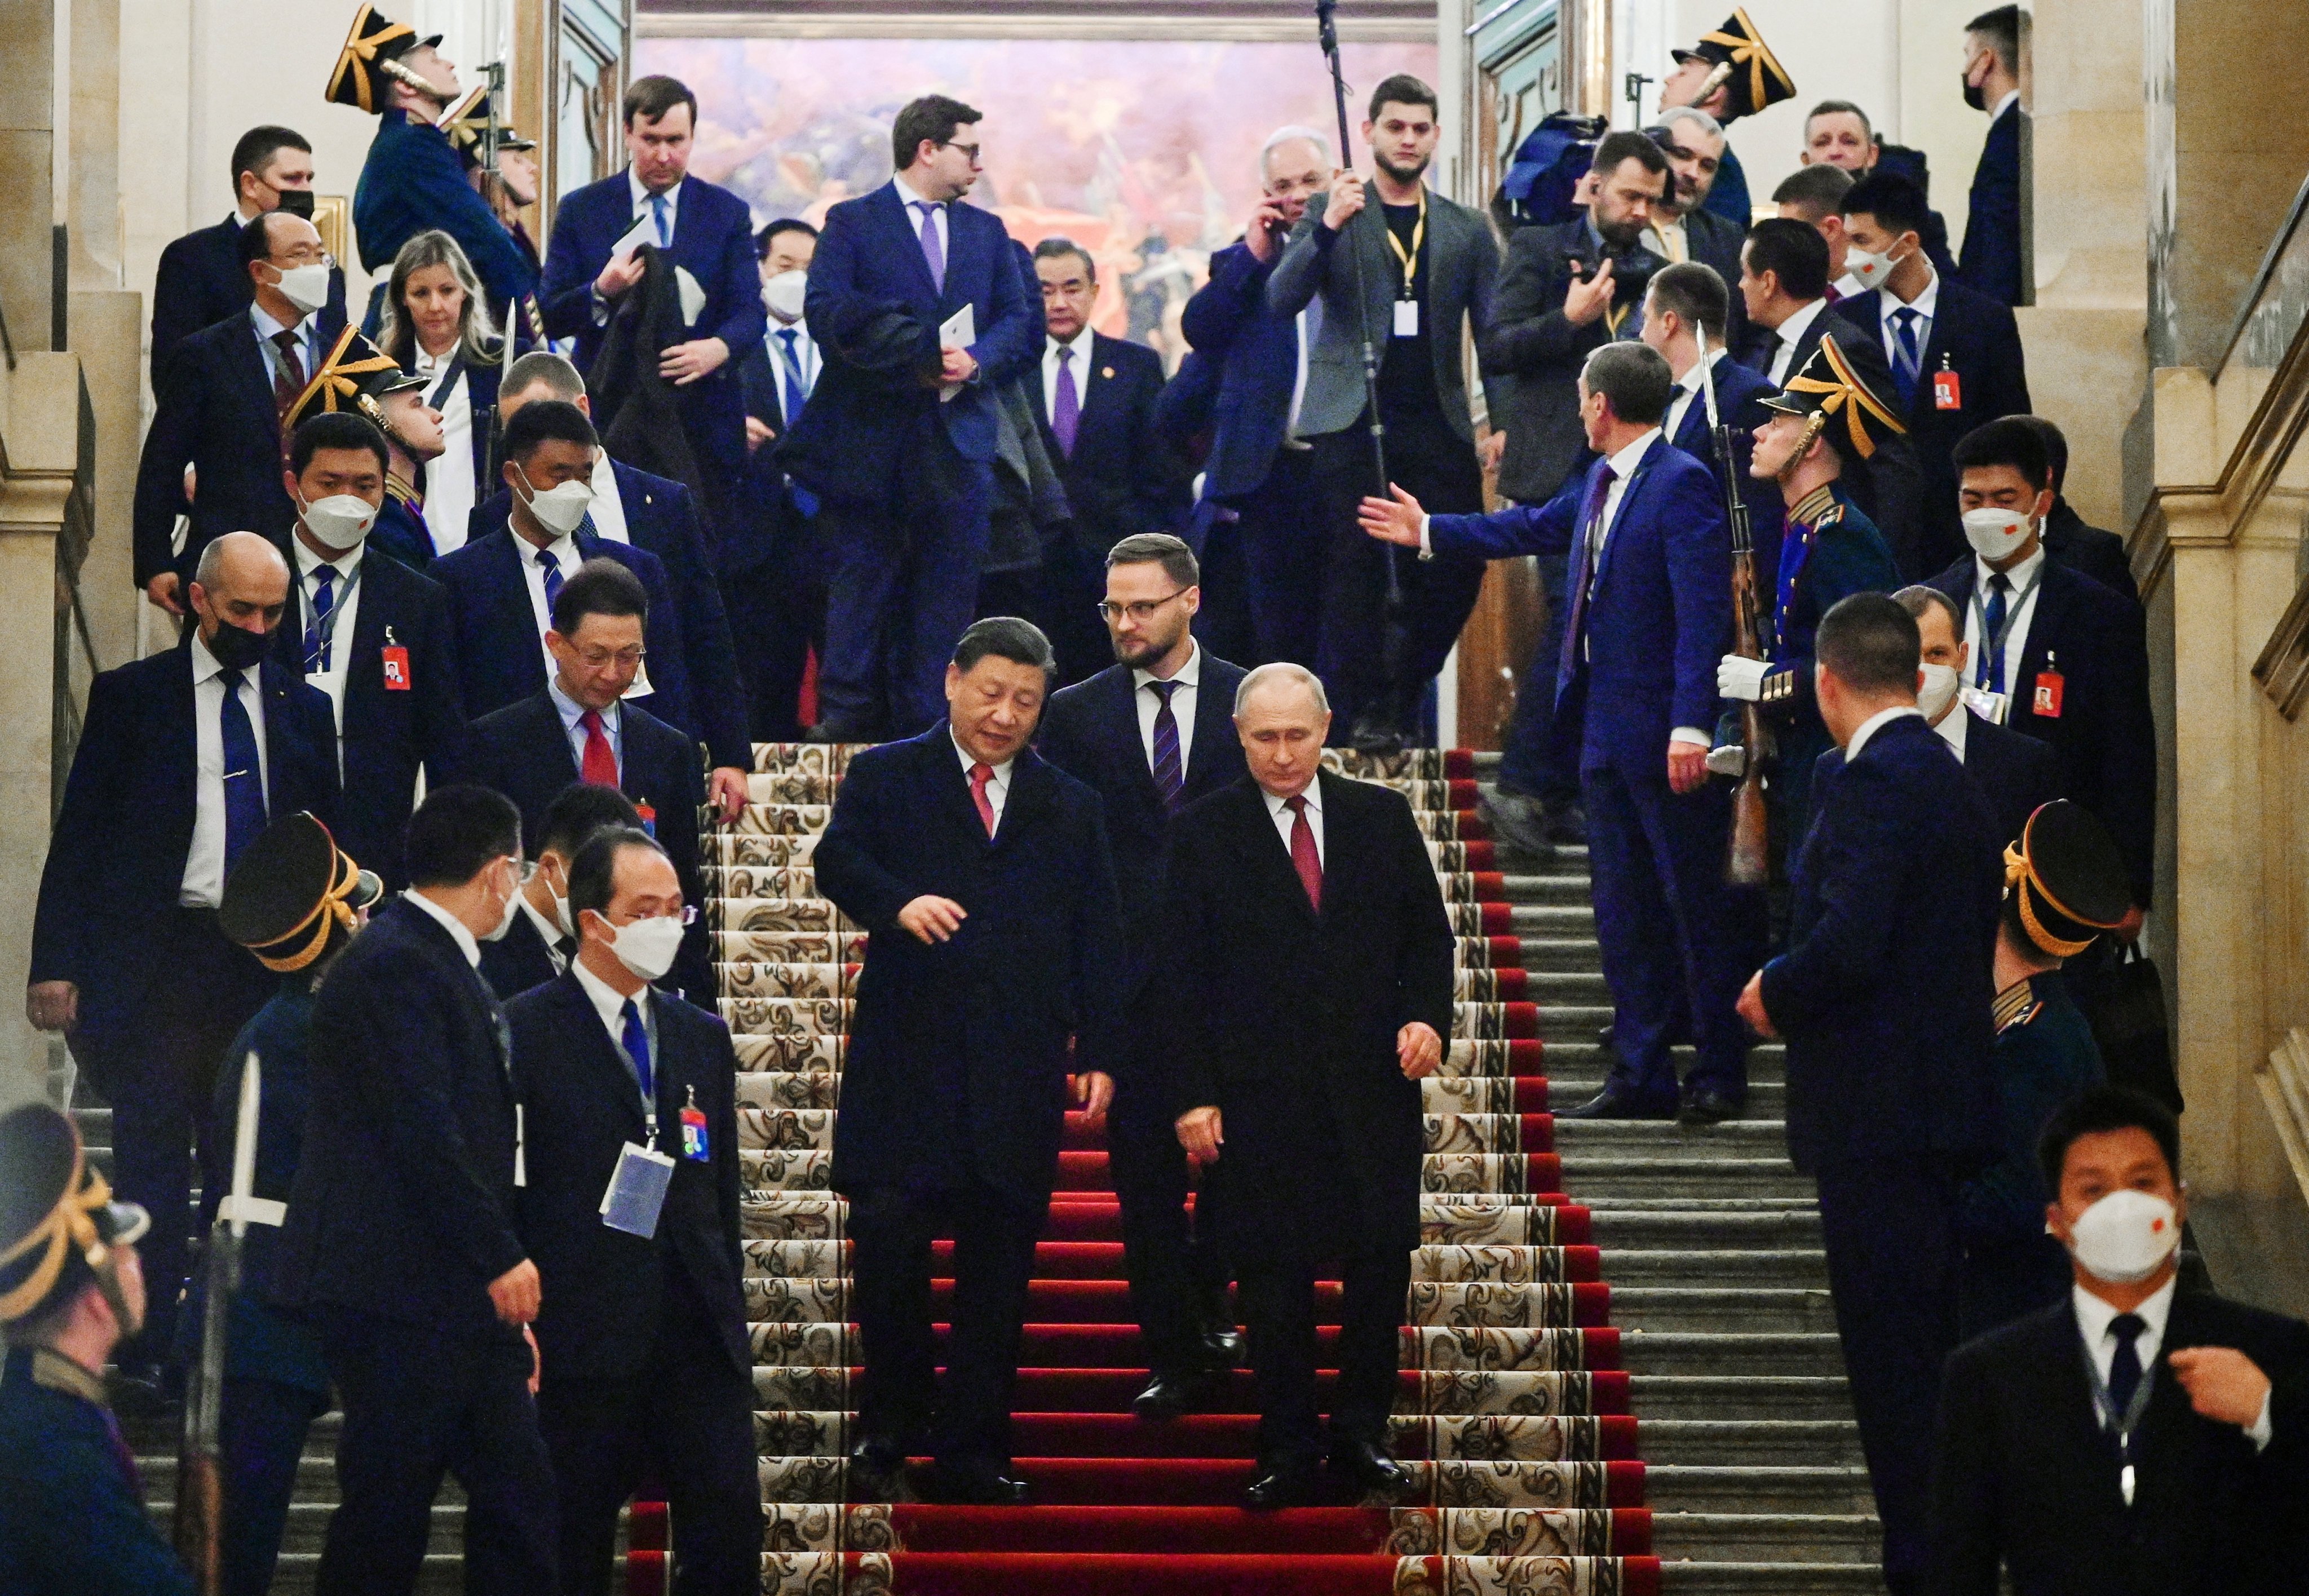 Russian President Vladimir Putin and Chinese President Xi Jinping leave after a reception at the Kremlin in Moscow on March 21. Photo:  Sputnik/Kremlin via Reuters